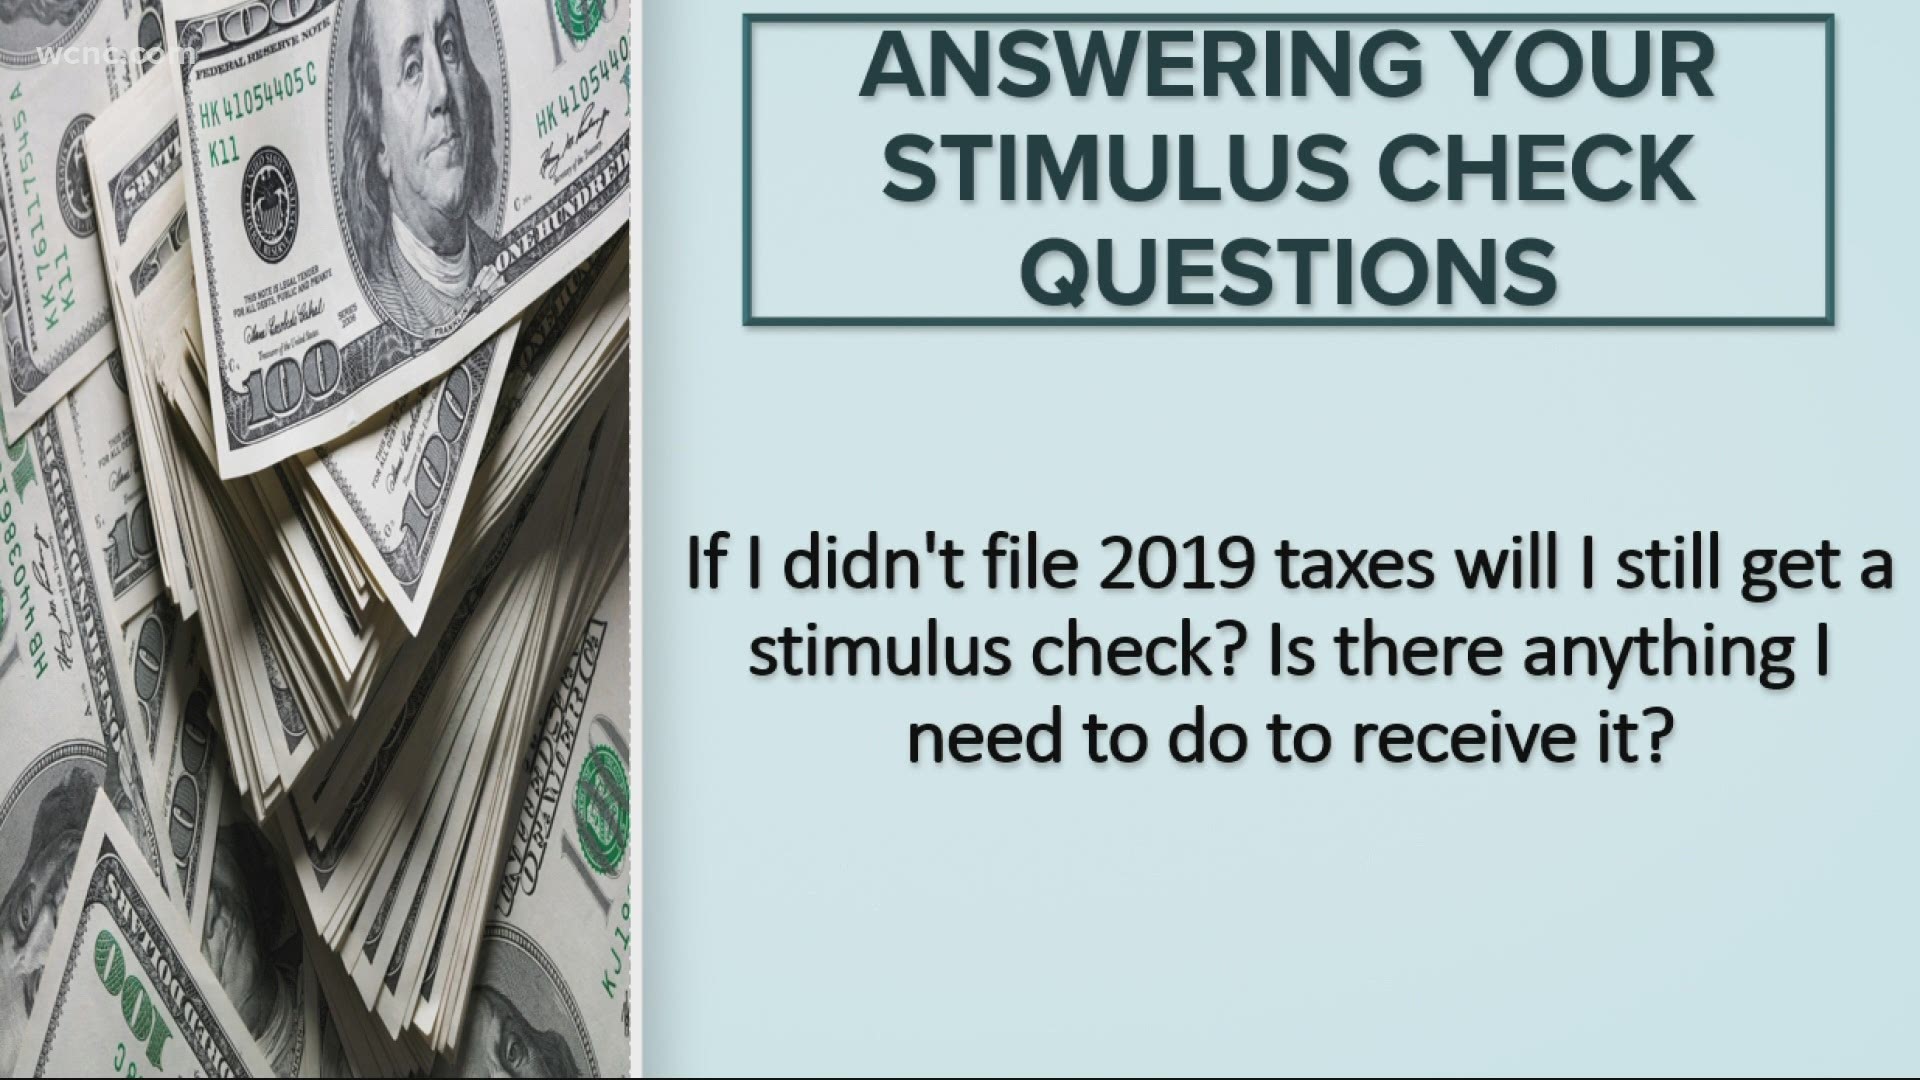 will there be a third stimulus check coming out